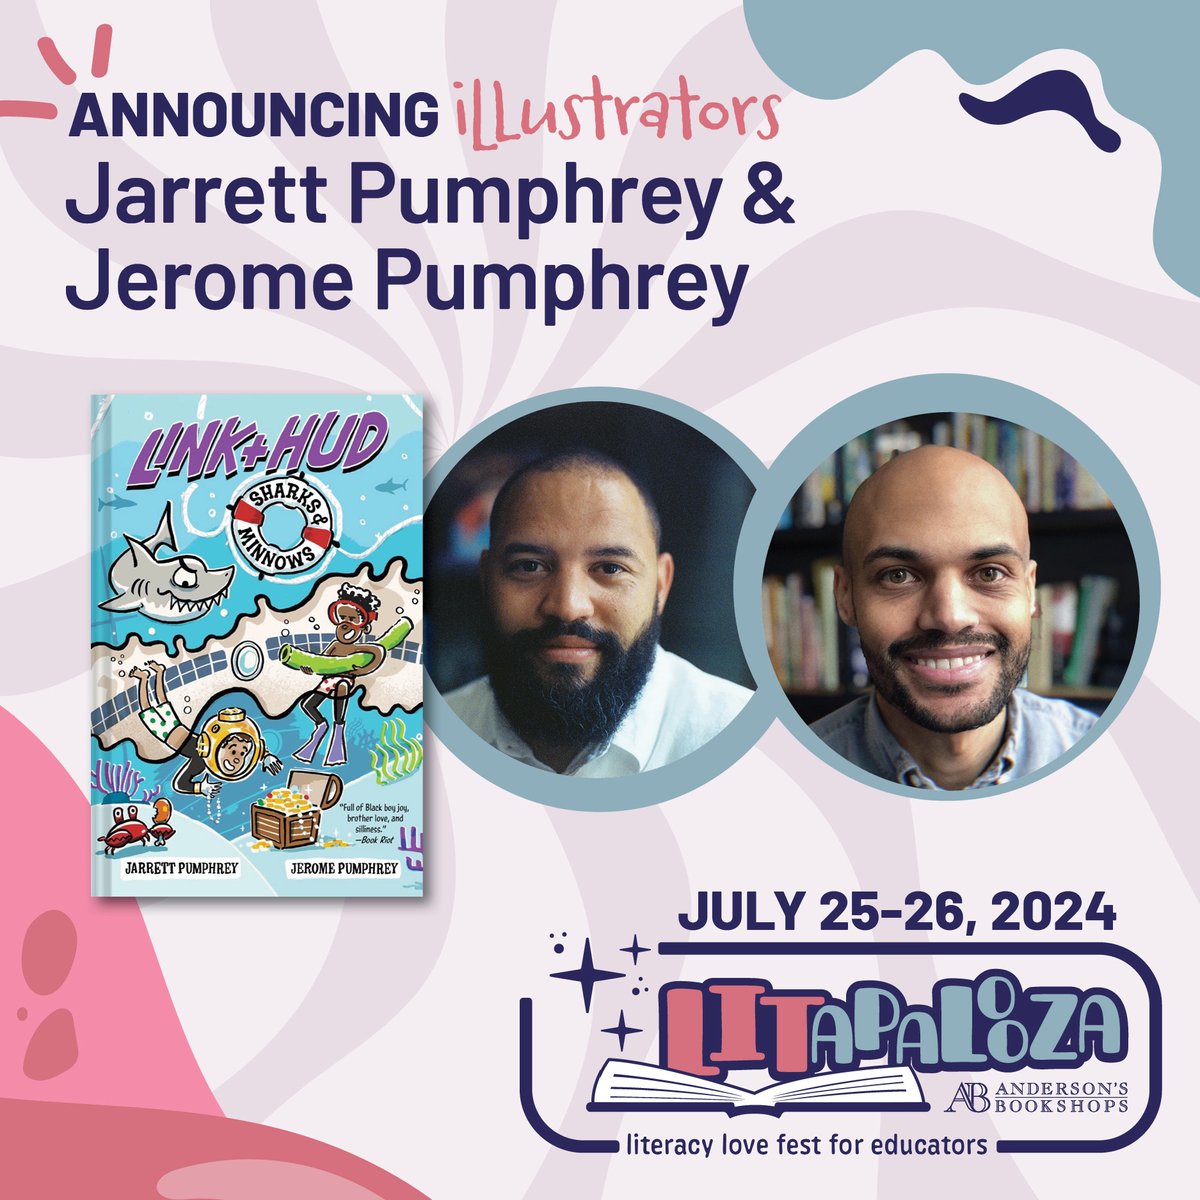 Happy #LITFriday! We are positively abuzz because @MrNathanHale @CynLeitichSmith @KeklaMagoon @jpumphrey & @wjpumphrey will join us at #LITapalooza this summer, along with 70 other kidlit creators! REGISTER HERE: LITapalooza2024.eventcombo.com